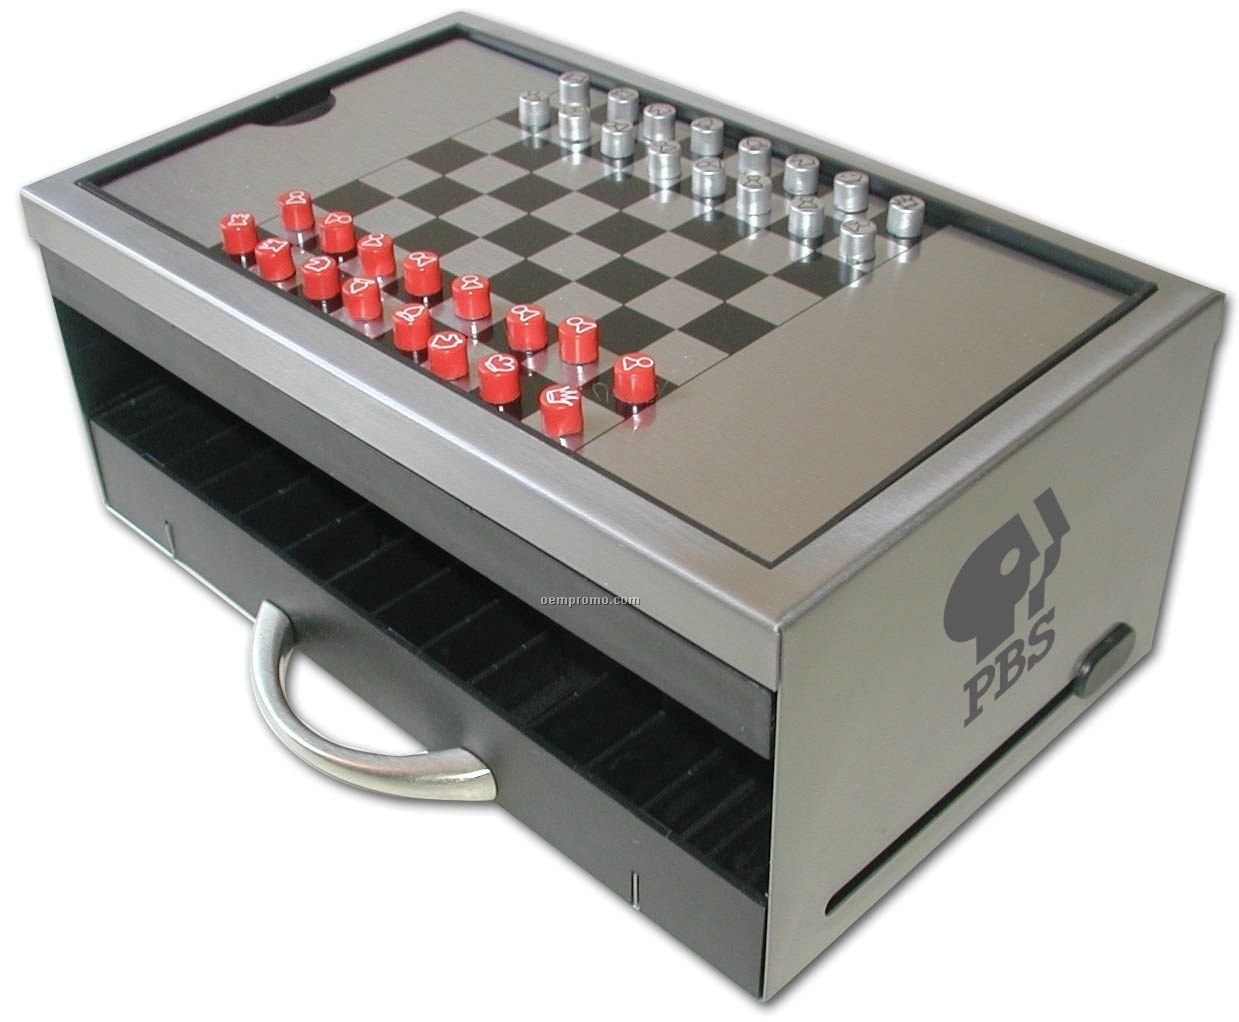 Chess/Checkers Game With Card Holder & Index